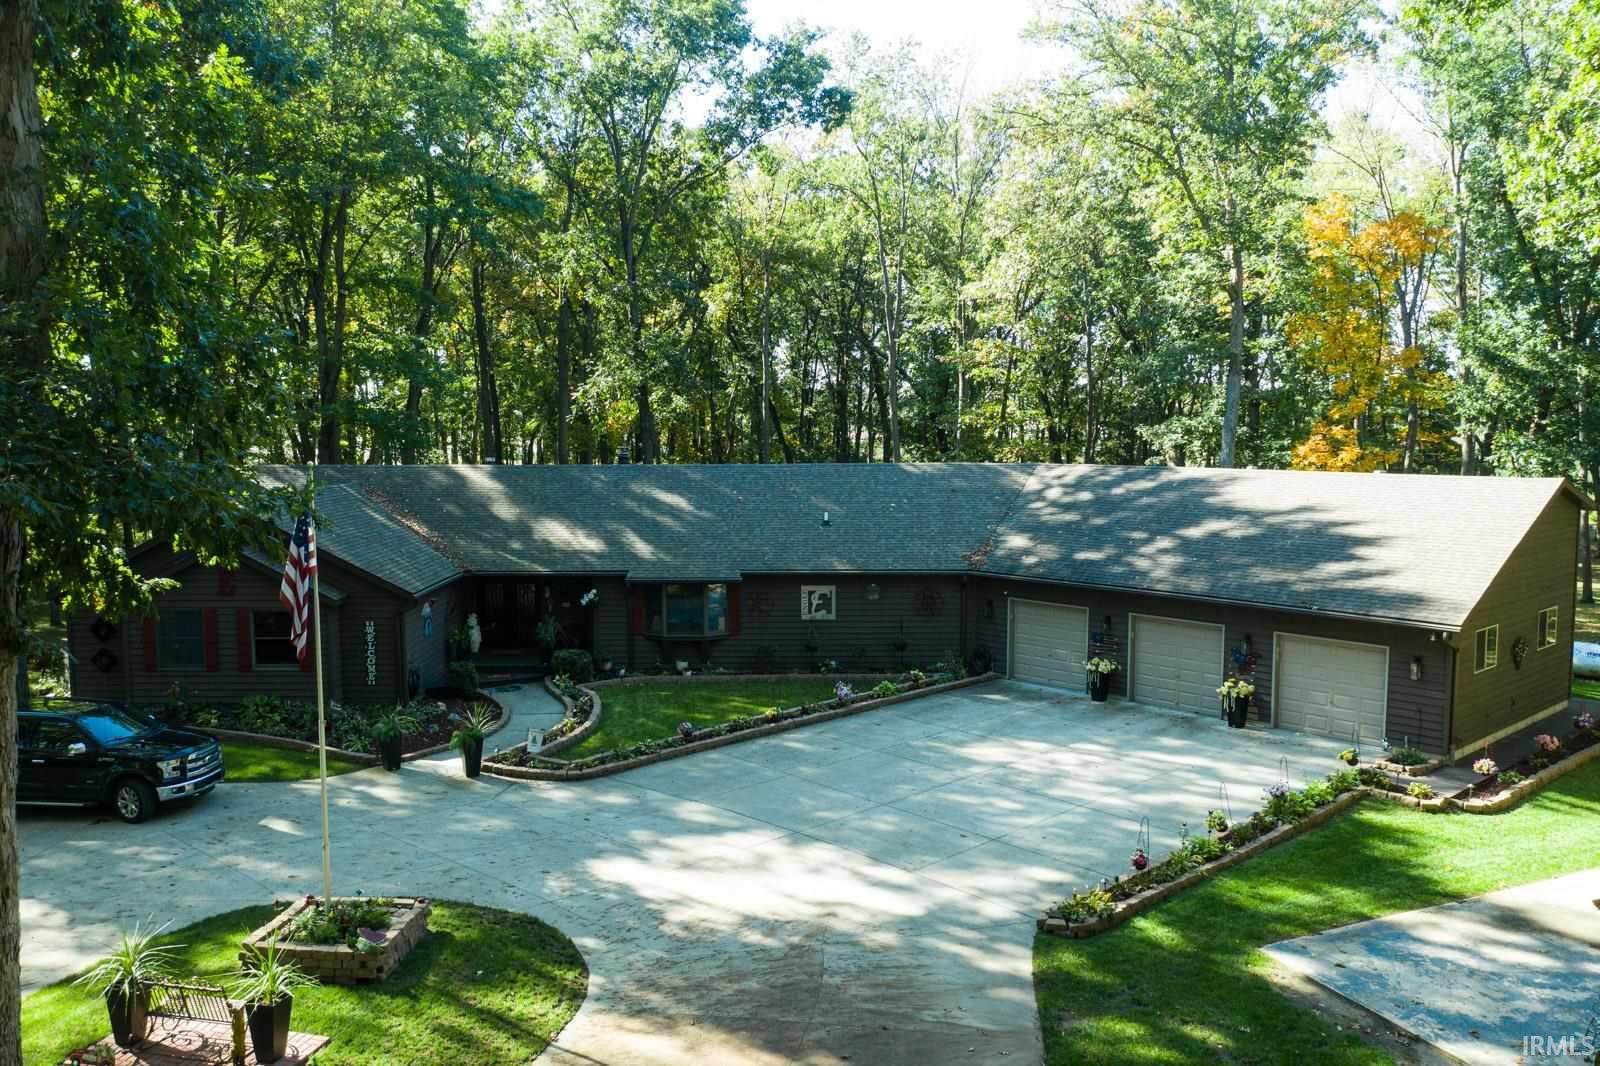 5 acres of privacy and wooded to enjoy the wildlife.  3-4 bedrooms, 2 1/2 baths, sunroom, 2000 sq ft cedar deck (2019), Fully insulated 3+ garage, greenhouse, composite HE & SHE sheds, extra well, newer roof (2012), Trane furnace (2018) with air filtration, remodeled kitchen (2020) with quartz counters, gas stove with pot filler, temperature controlled wine fridge that holds 100 bottles of wine and a full house generator for peace of mind!